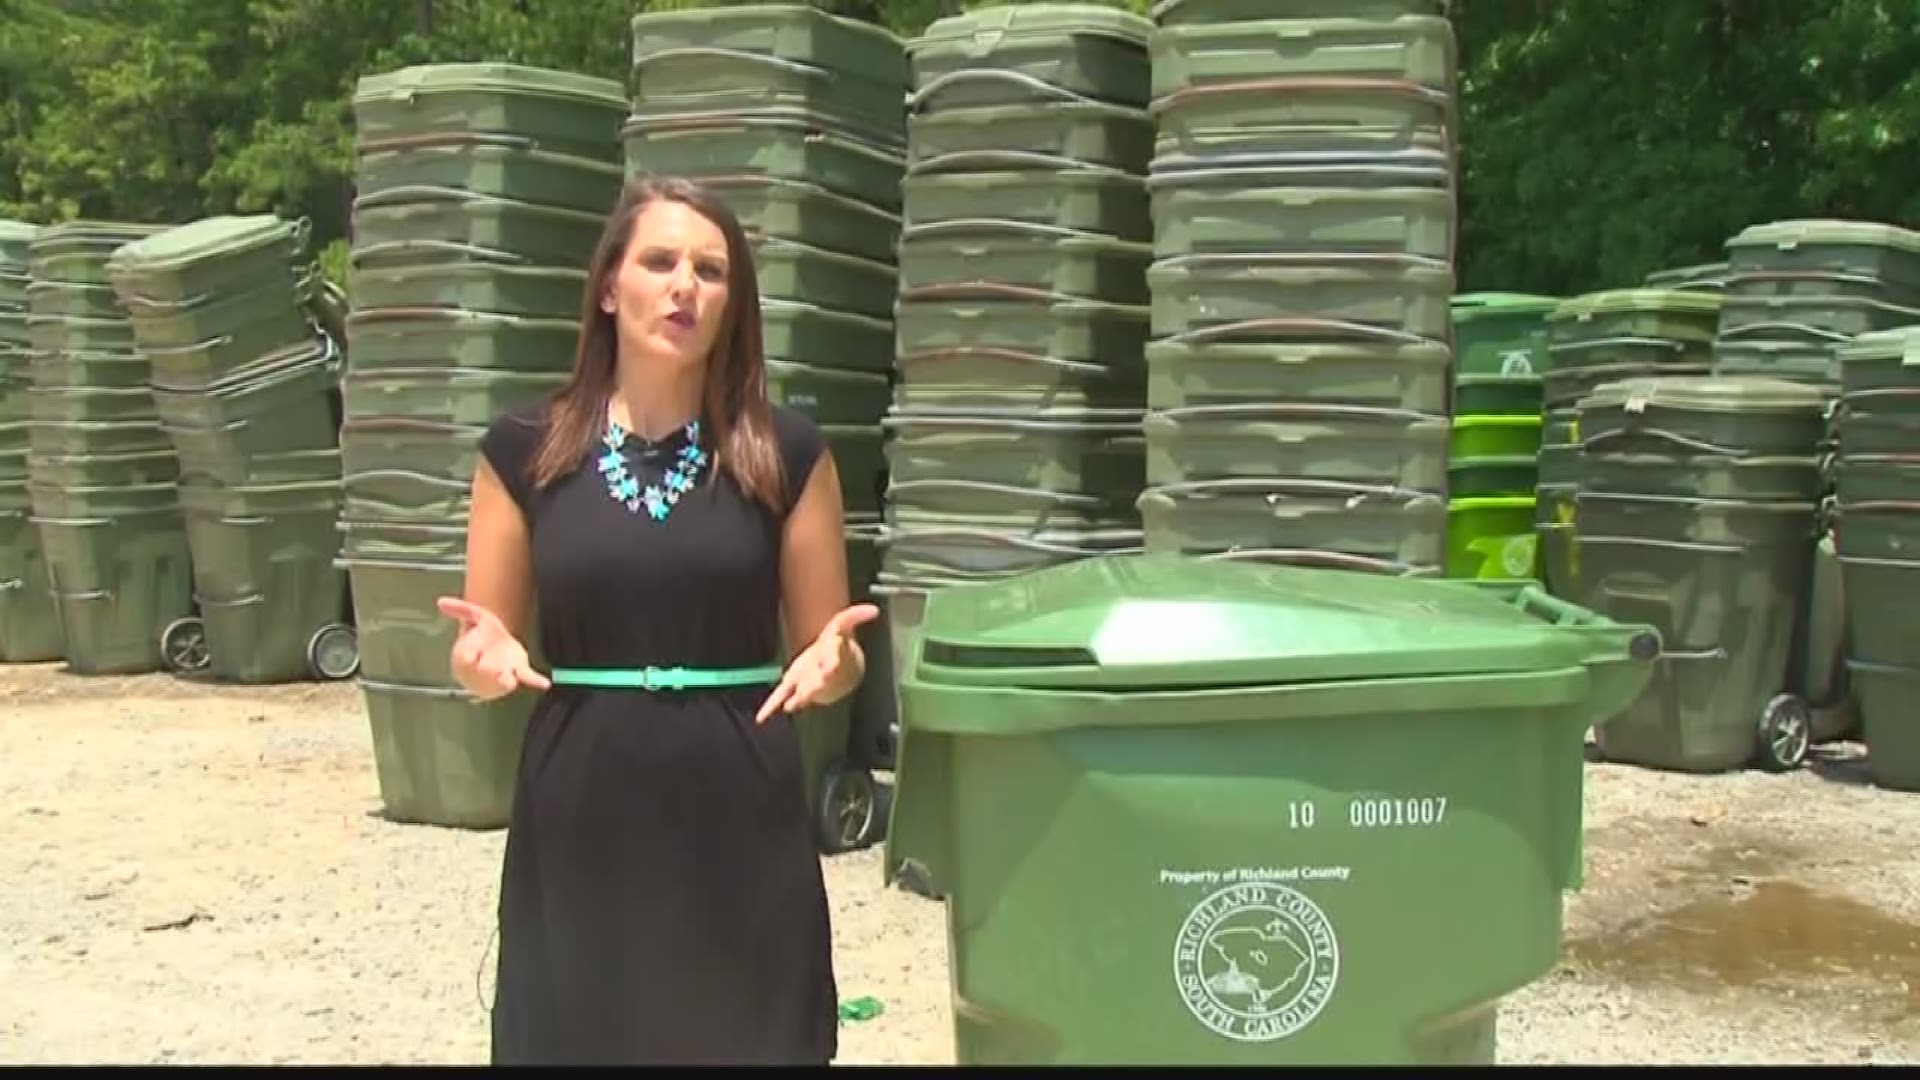 What if your trash can -- the ones provided by your town, city or county -- was tracking you? That's what one of our viewers said she feared was happening in Richland County.